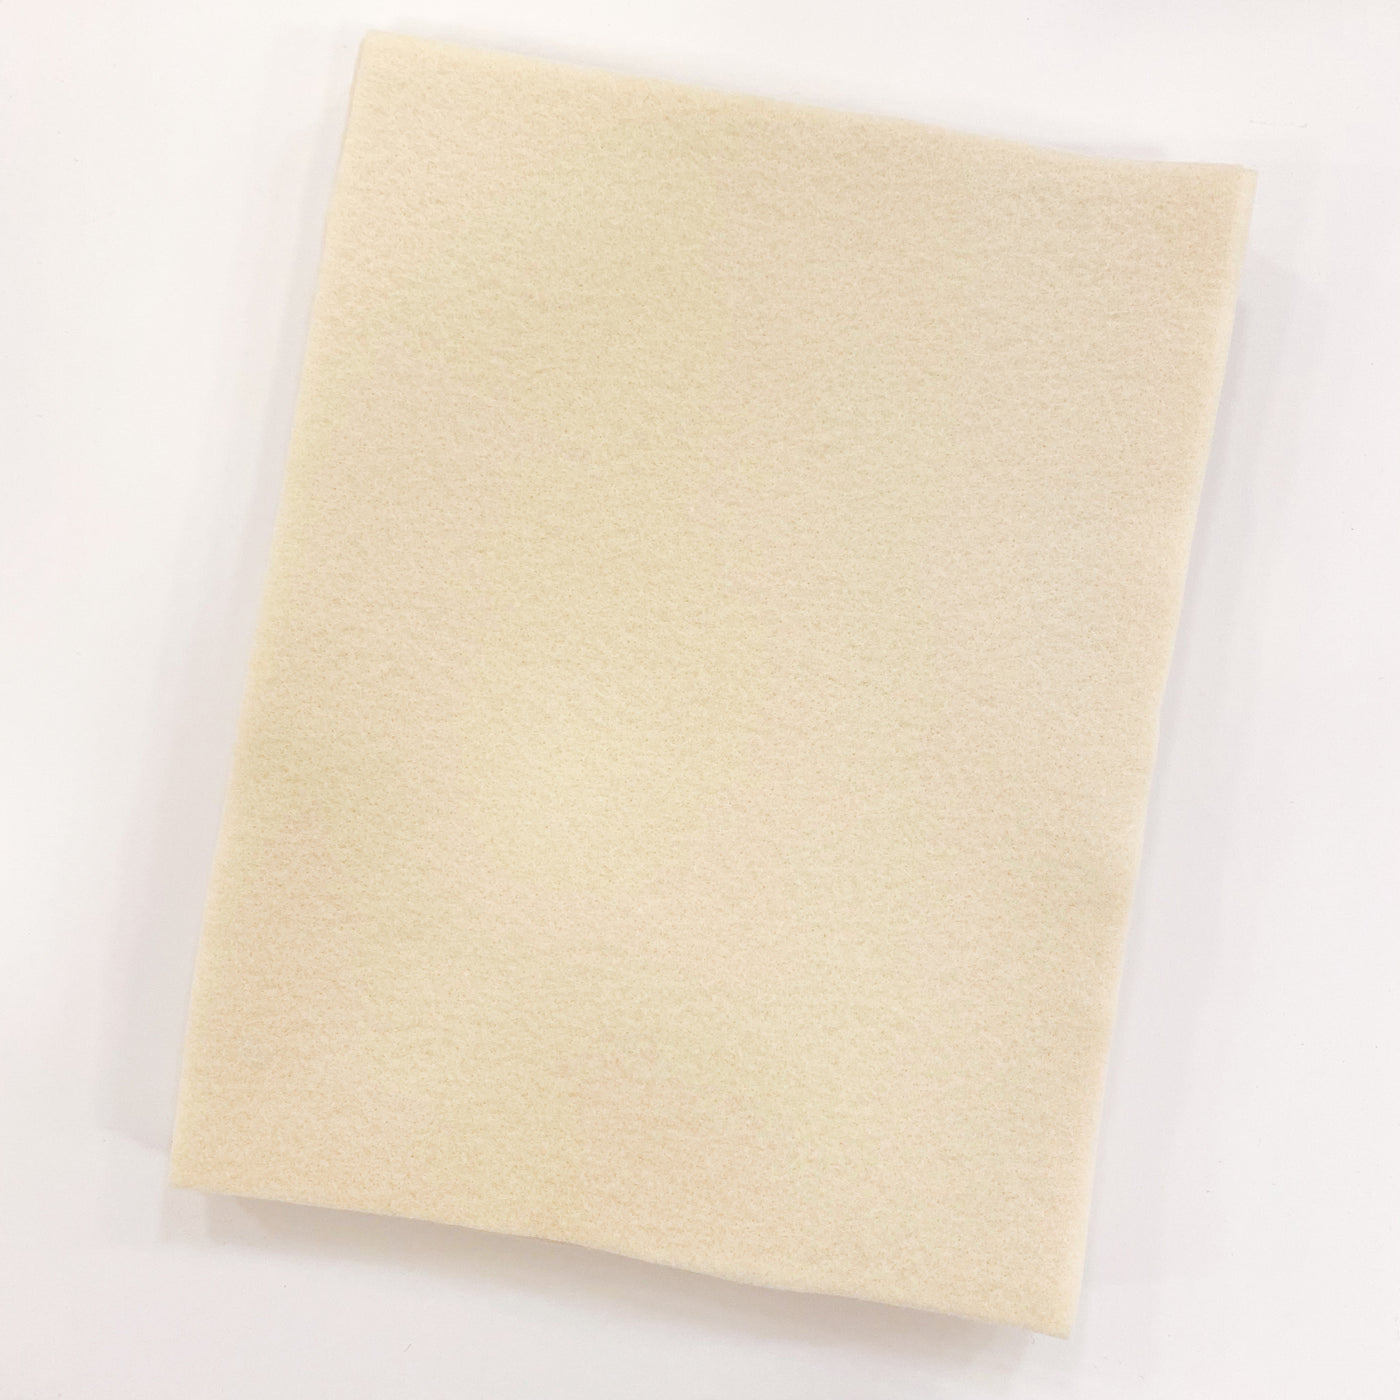 Antique White Acrylic Craft Felt in 9 by 11 inch sheets